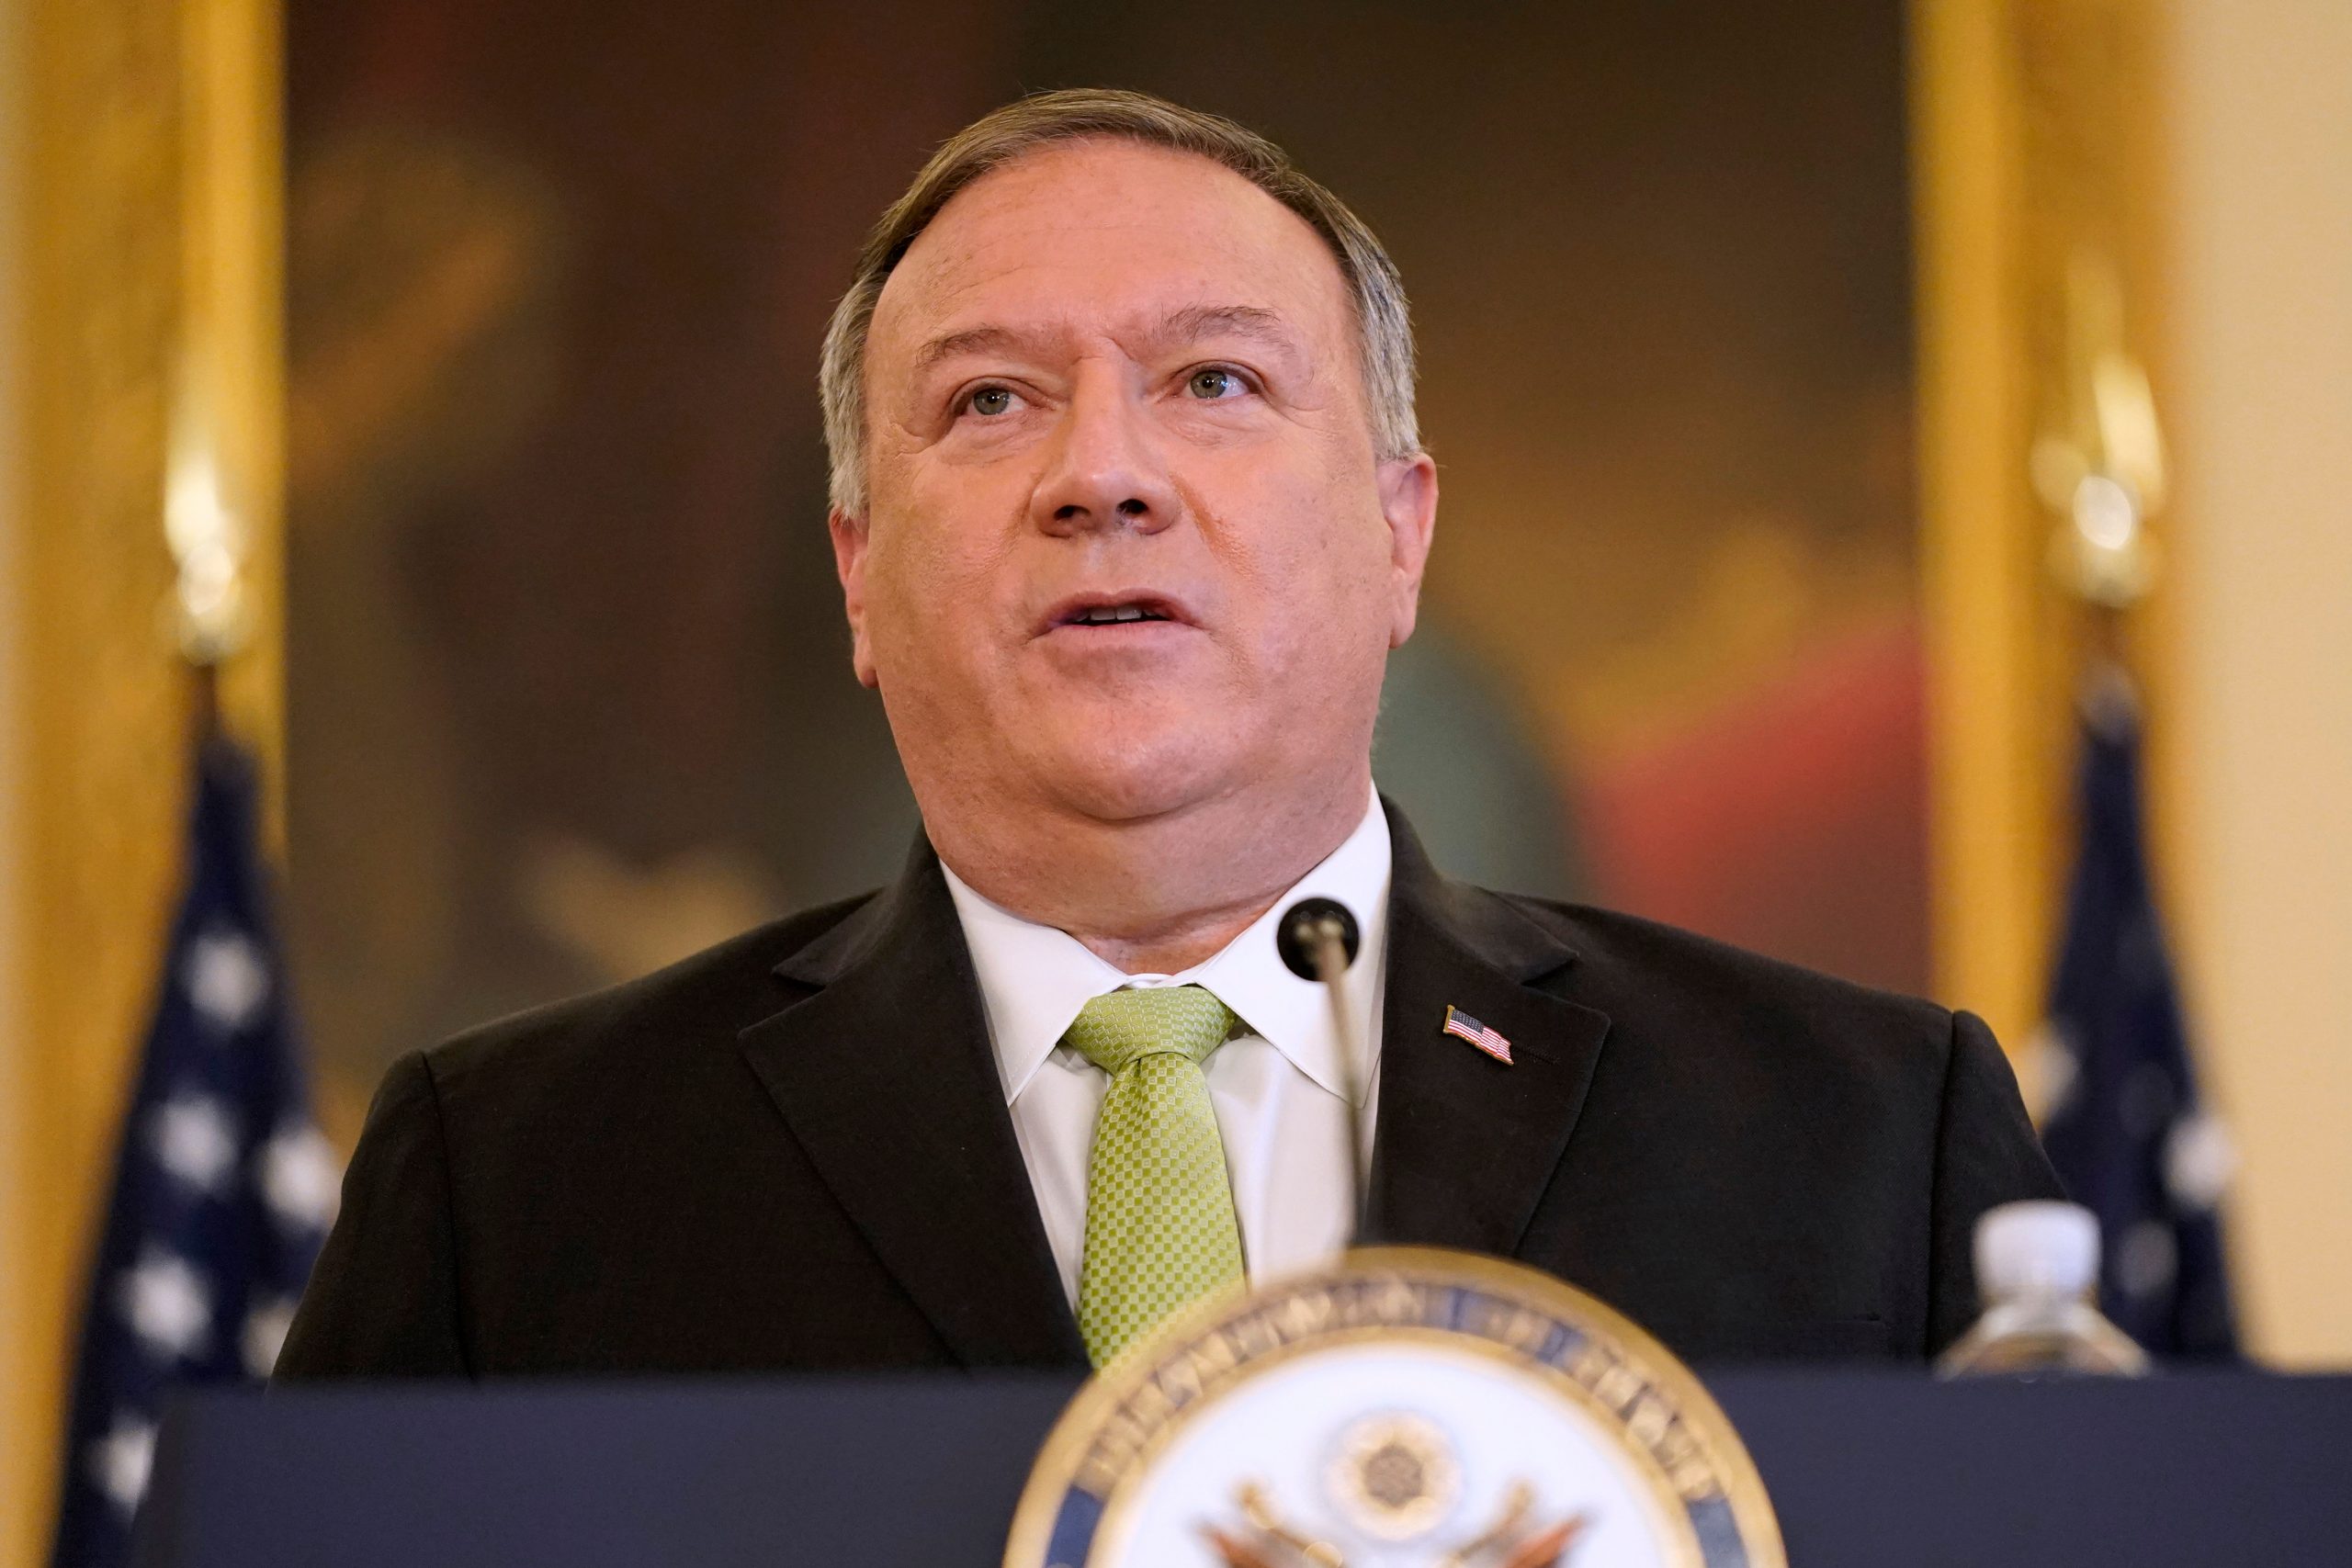 ‘Not intended to weaken military capabilities’: Mike Pompeo to Turkey after US sanctions